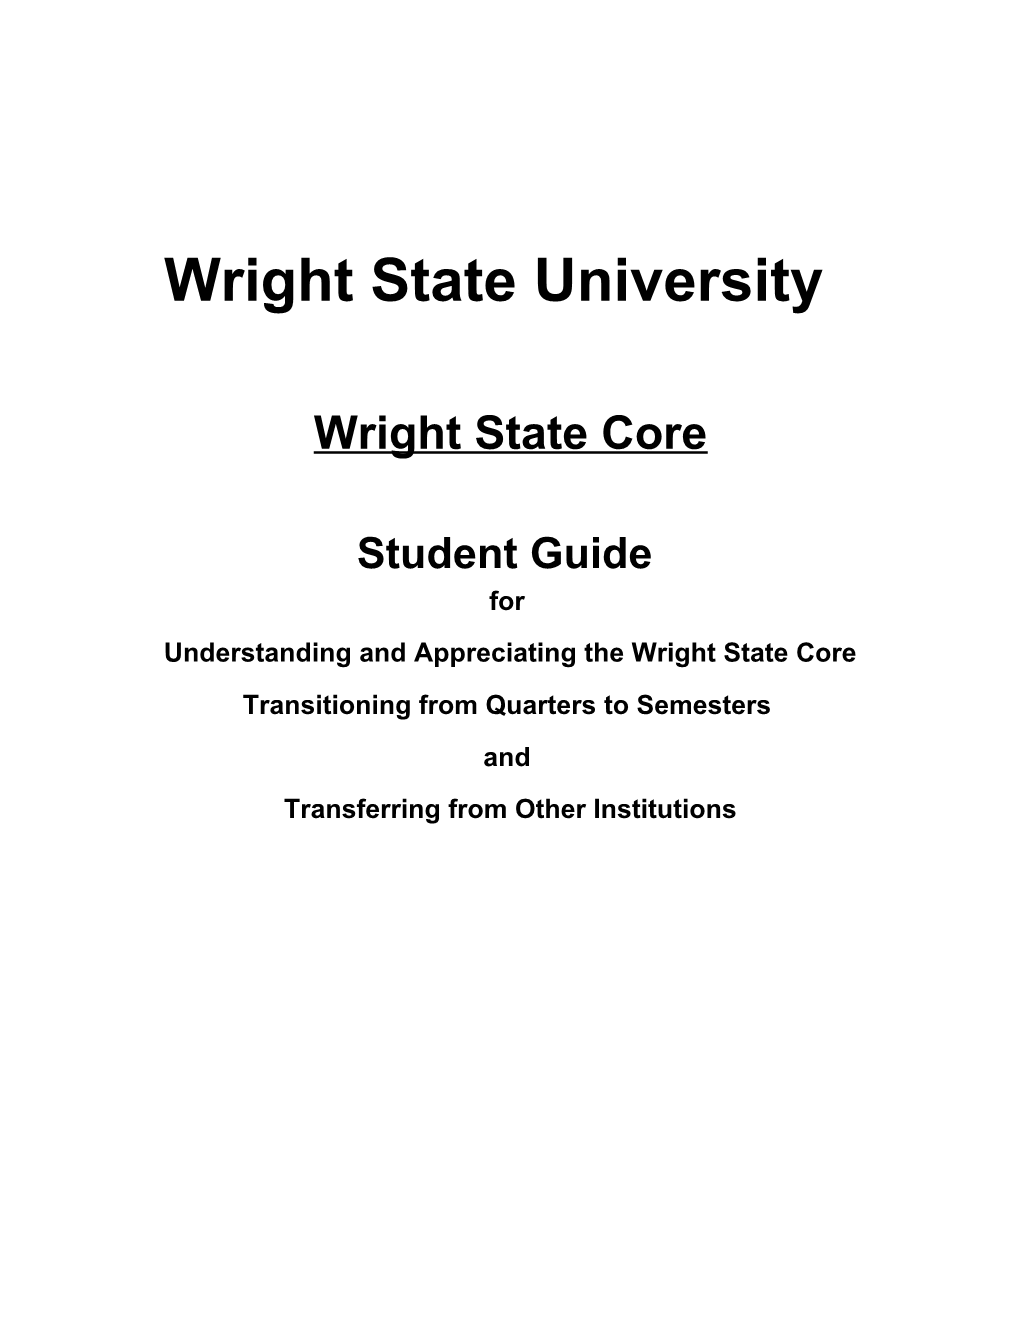 The Wright State Core Overview